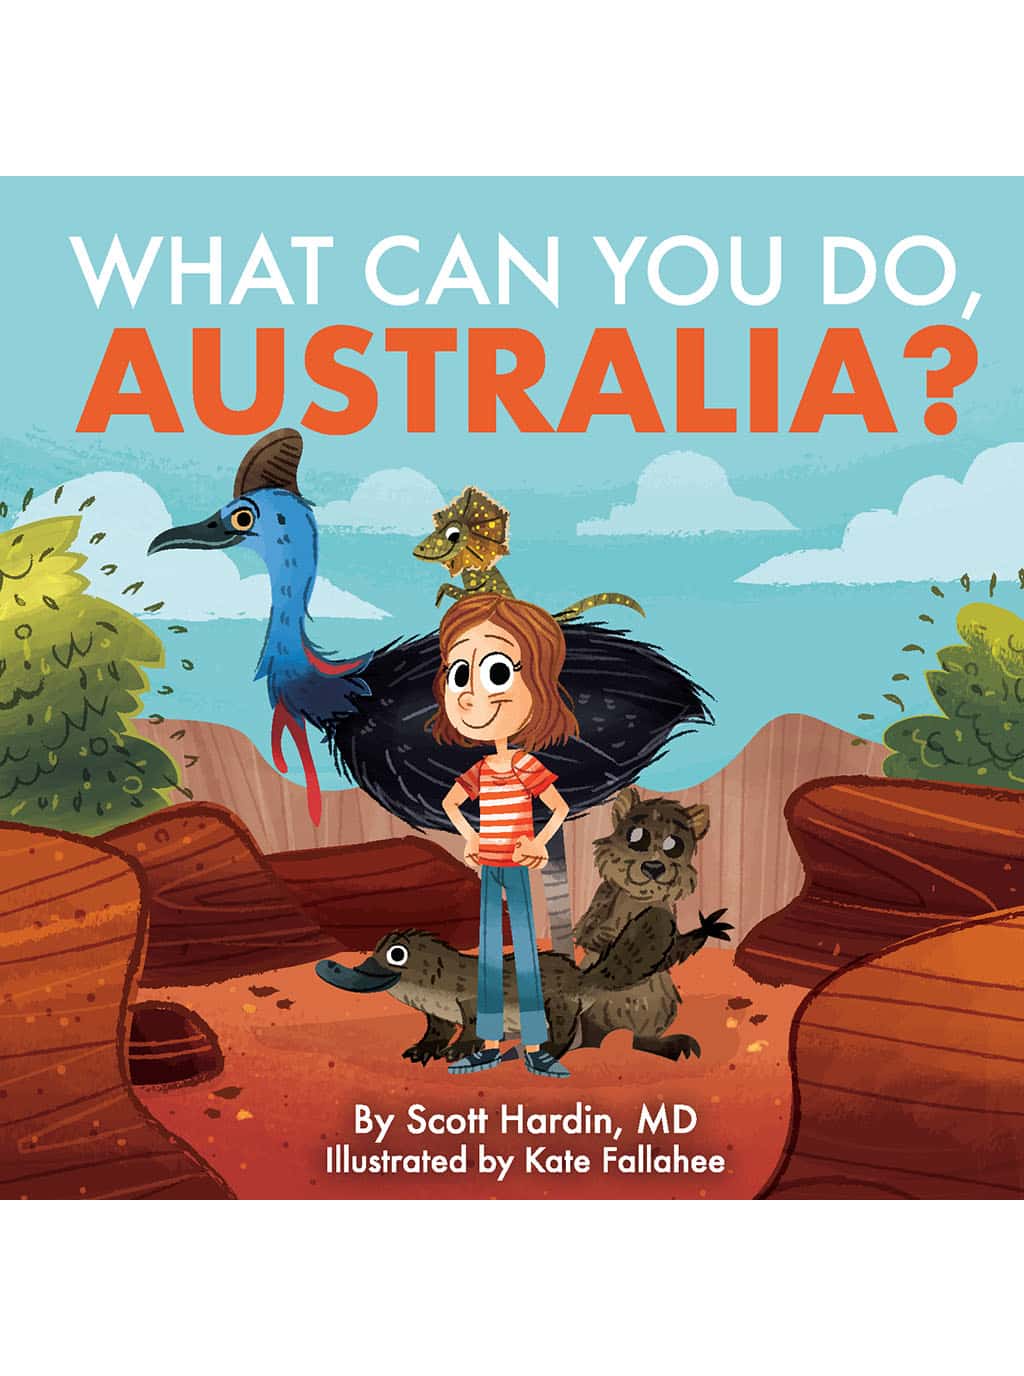 What Can You Do Australia creation science for kids board book cover